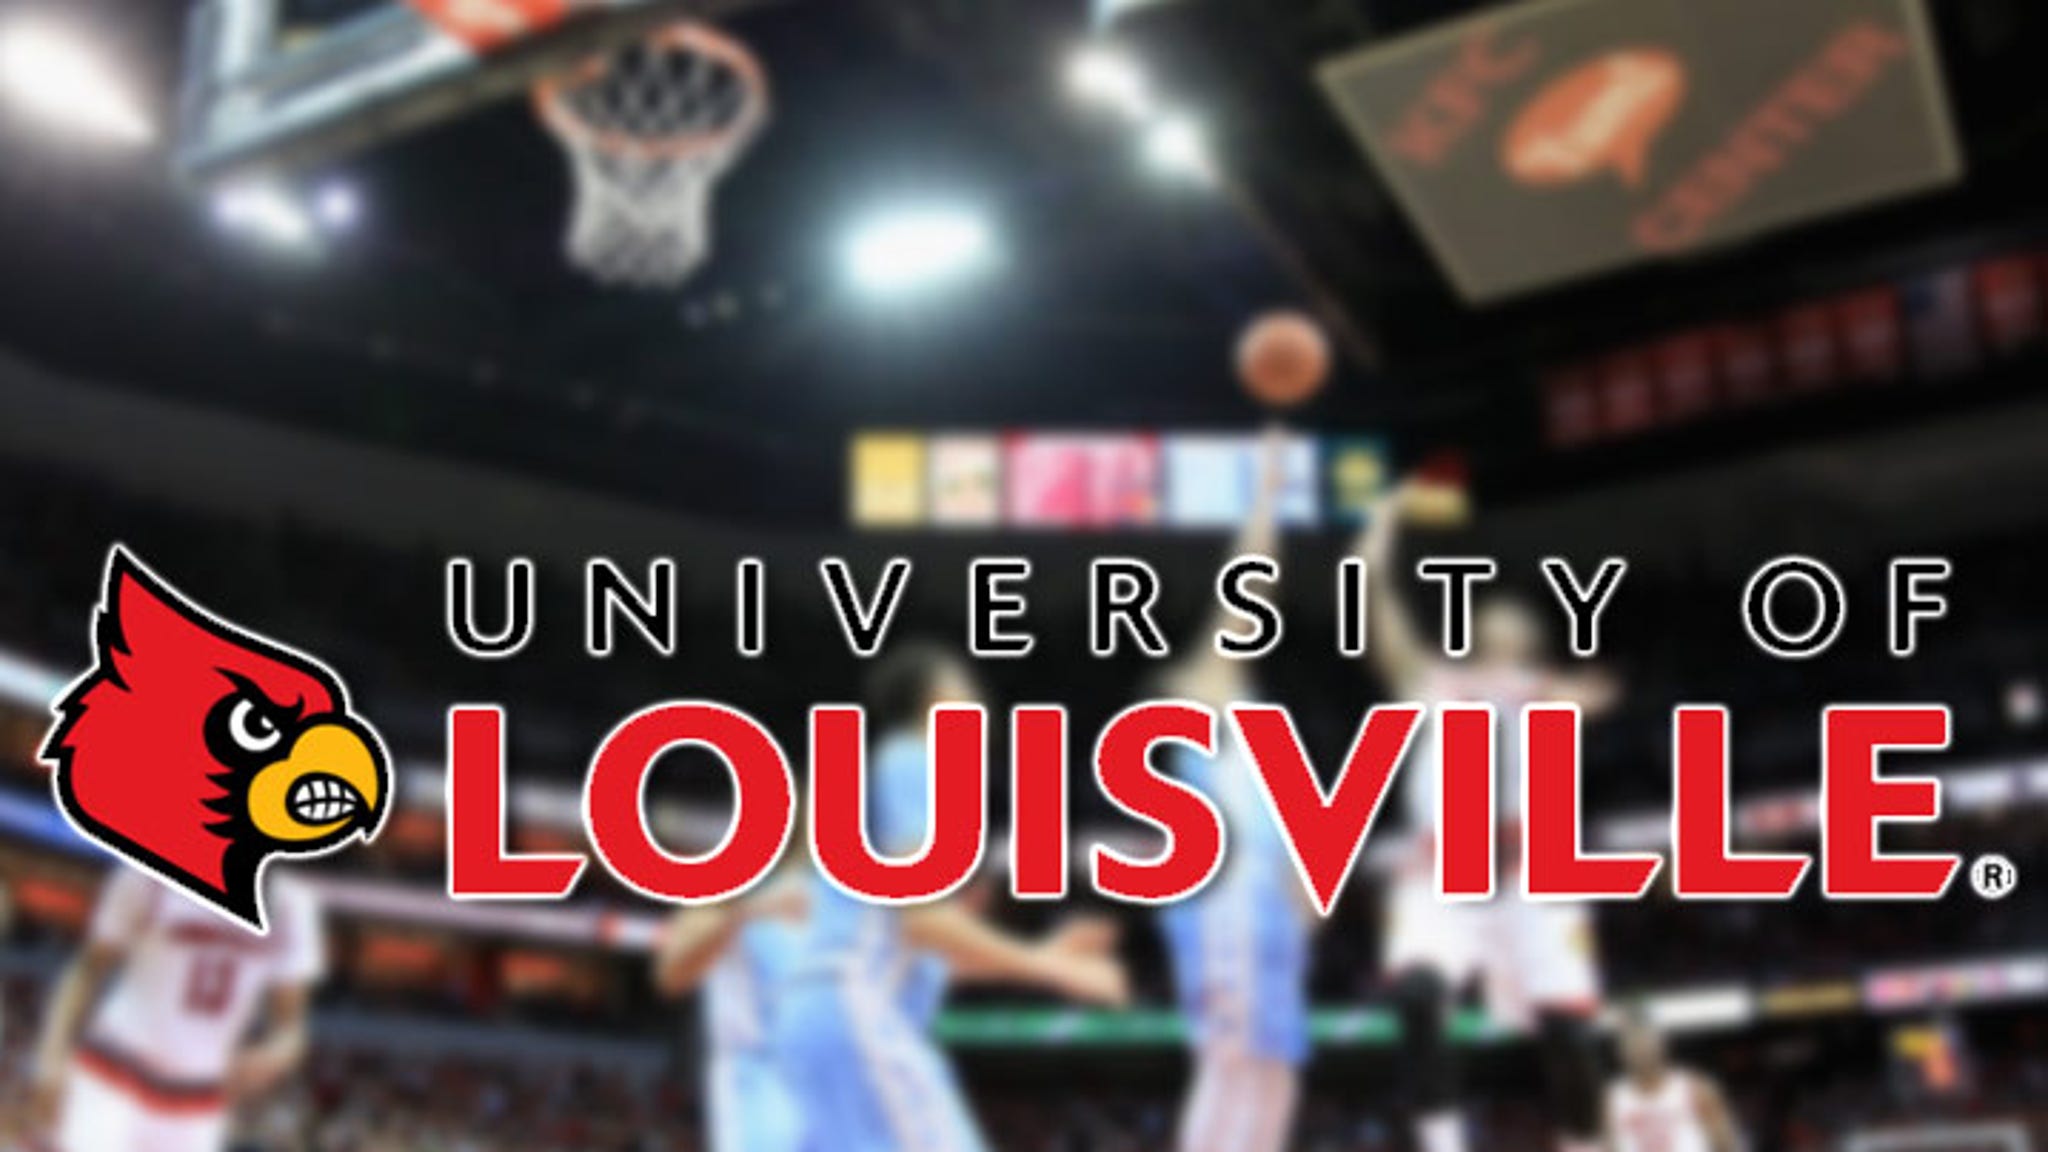 Louisville -- Self-Imposed NCAA Tourney Ban ... Over Hooker Scandal